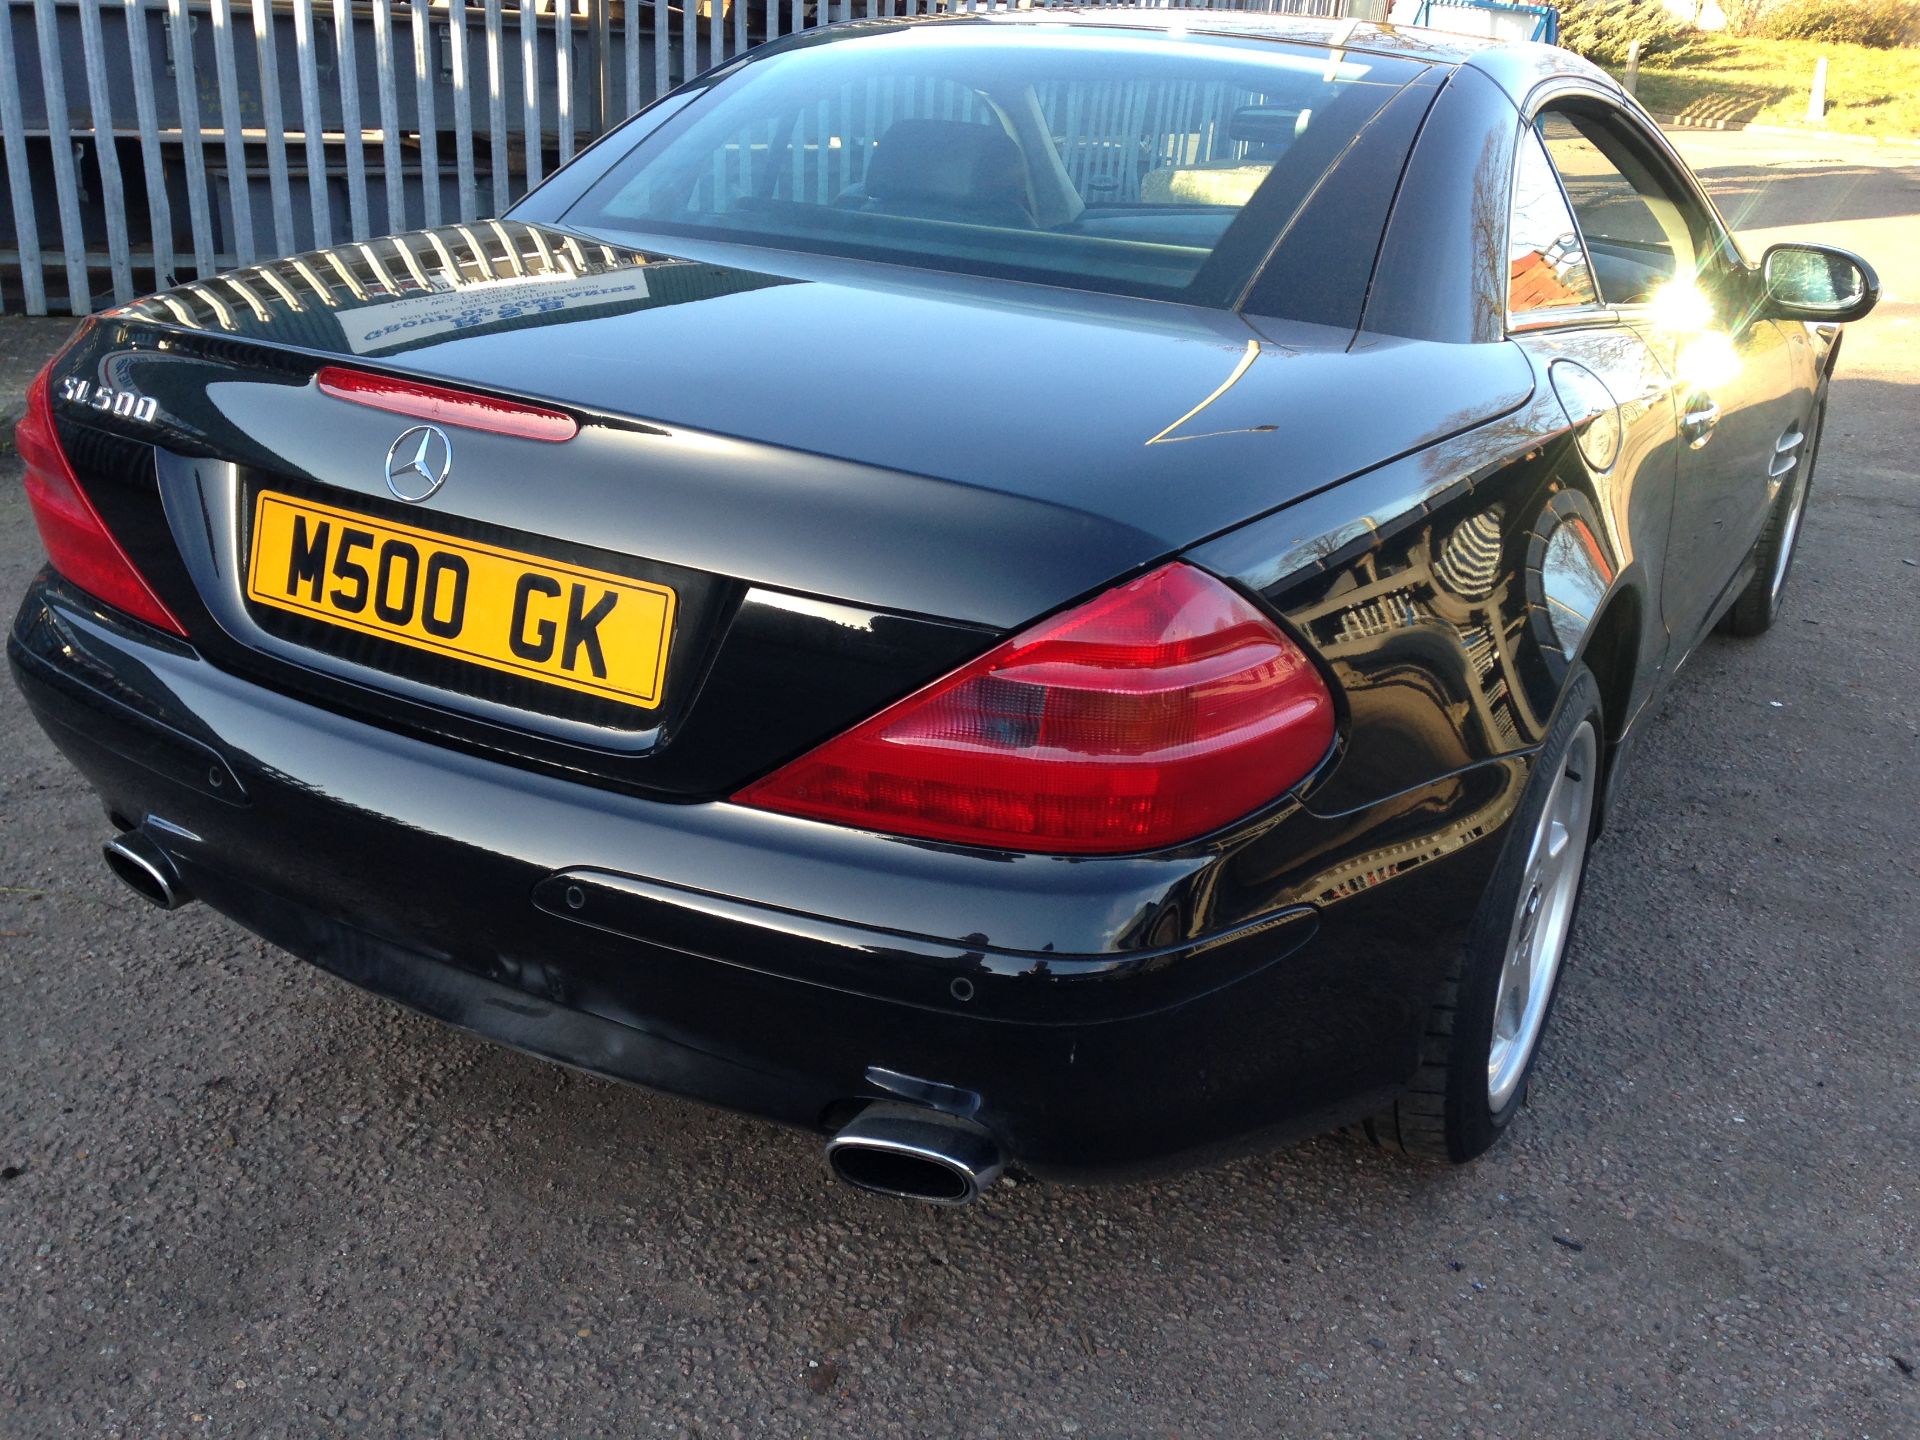 1 x Mercedes SL500 Automatic 5.0 Convertible - Petrol - Year 2002 - 94,500 Miles - Long MOT Expiry - Image 2 of 40